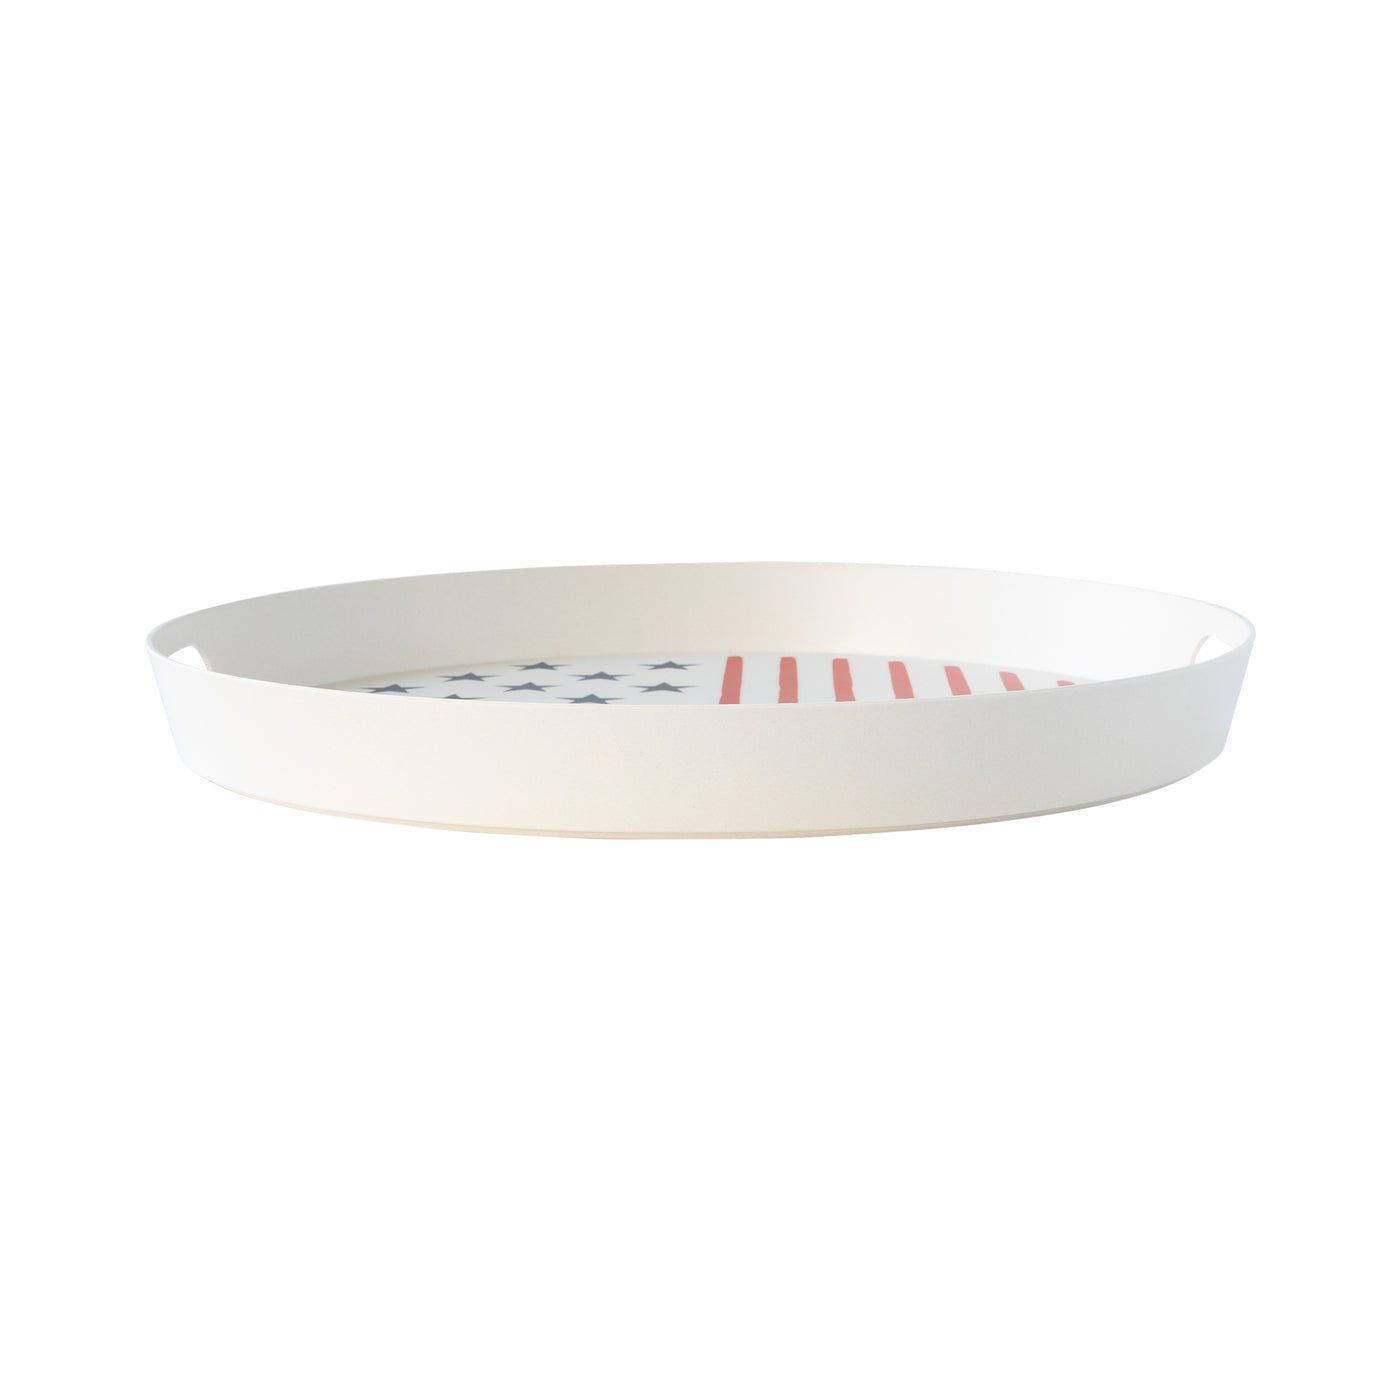 PLBT140 -  Stars and Stripes Reusable Bamboo Round Serving Tray